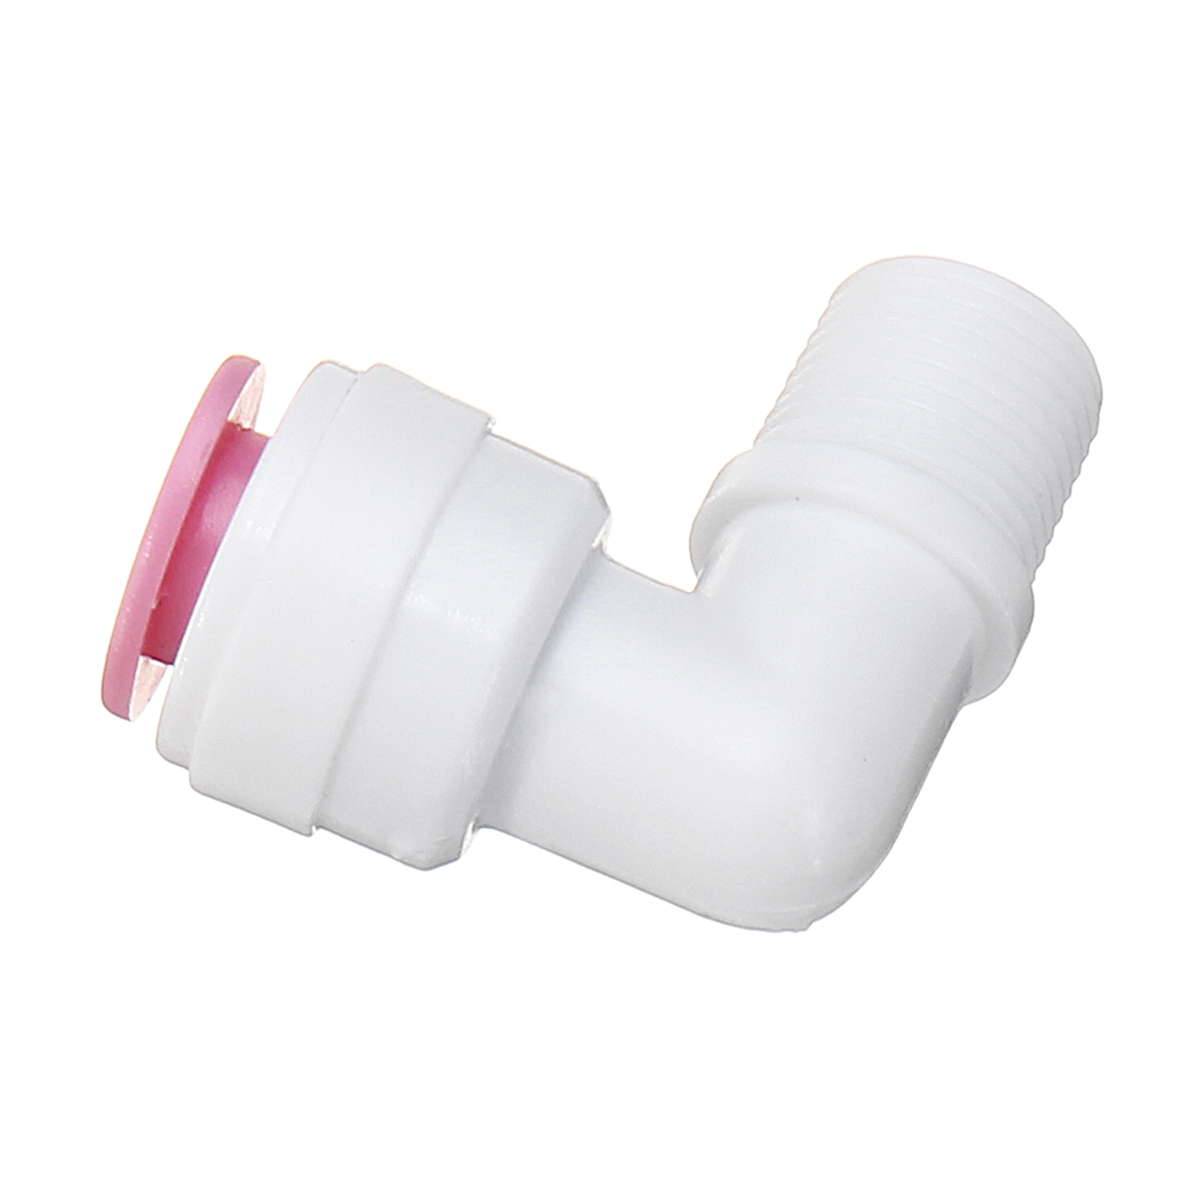 14-18-Inch-RO-Grade-Water-Pipes-Fittings-Quick-Connect-Push-In-to-Connect-Water-Pipe-1378099